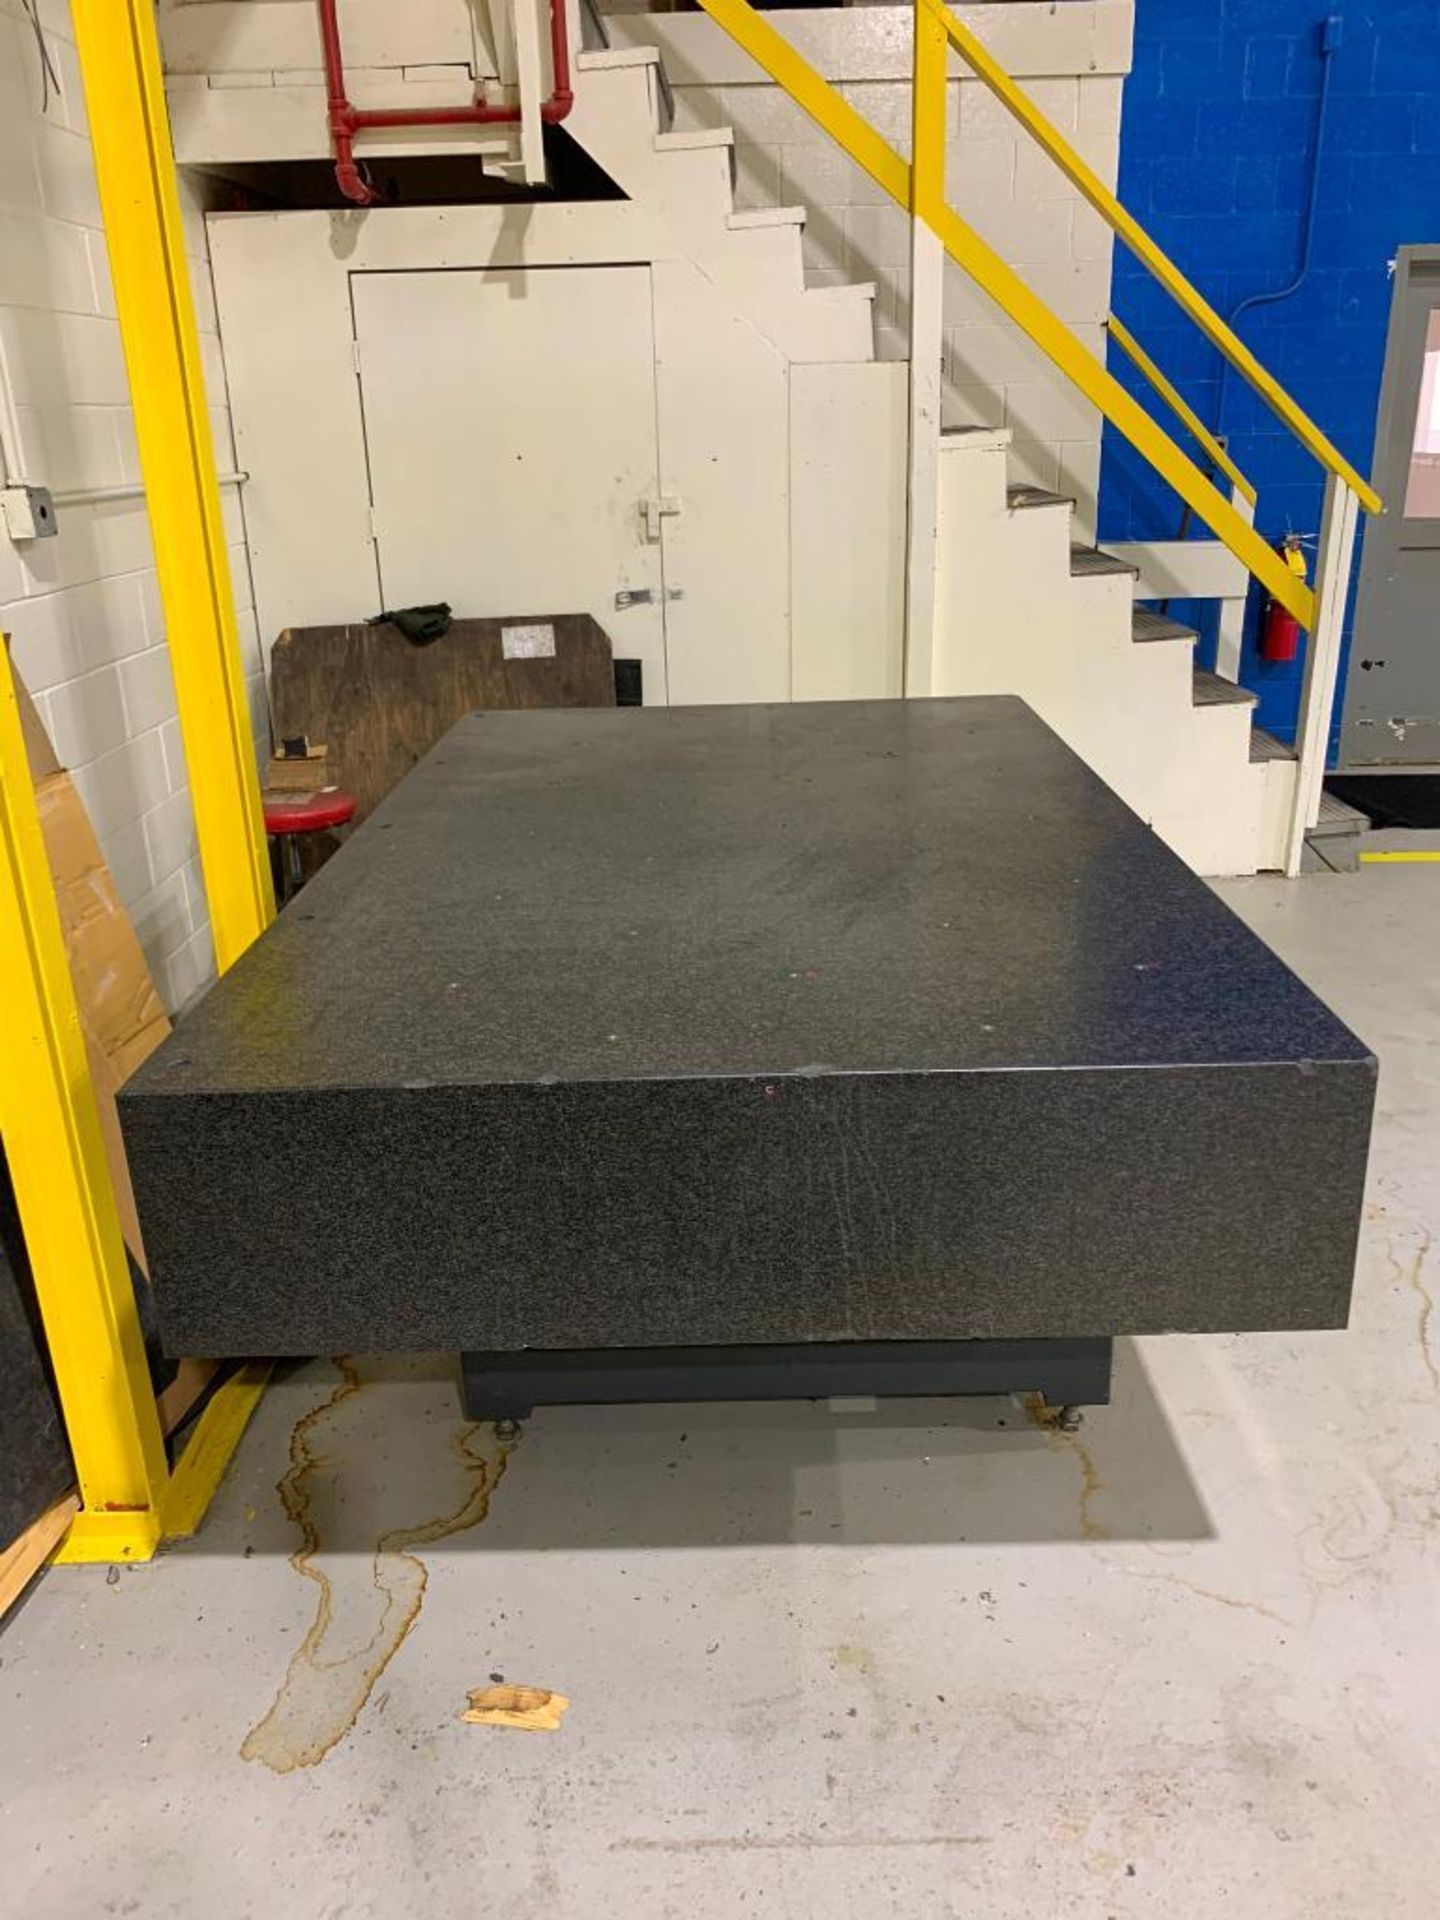 GRANITE SURFACE PLATE TABLE, 56-5/8" W X 90" L X 14" H (END LOCATION: 2860 N. NATIONAL RD., UNIT B, - Image 2 of 2